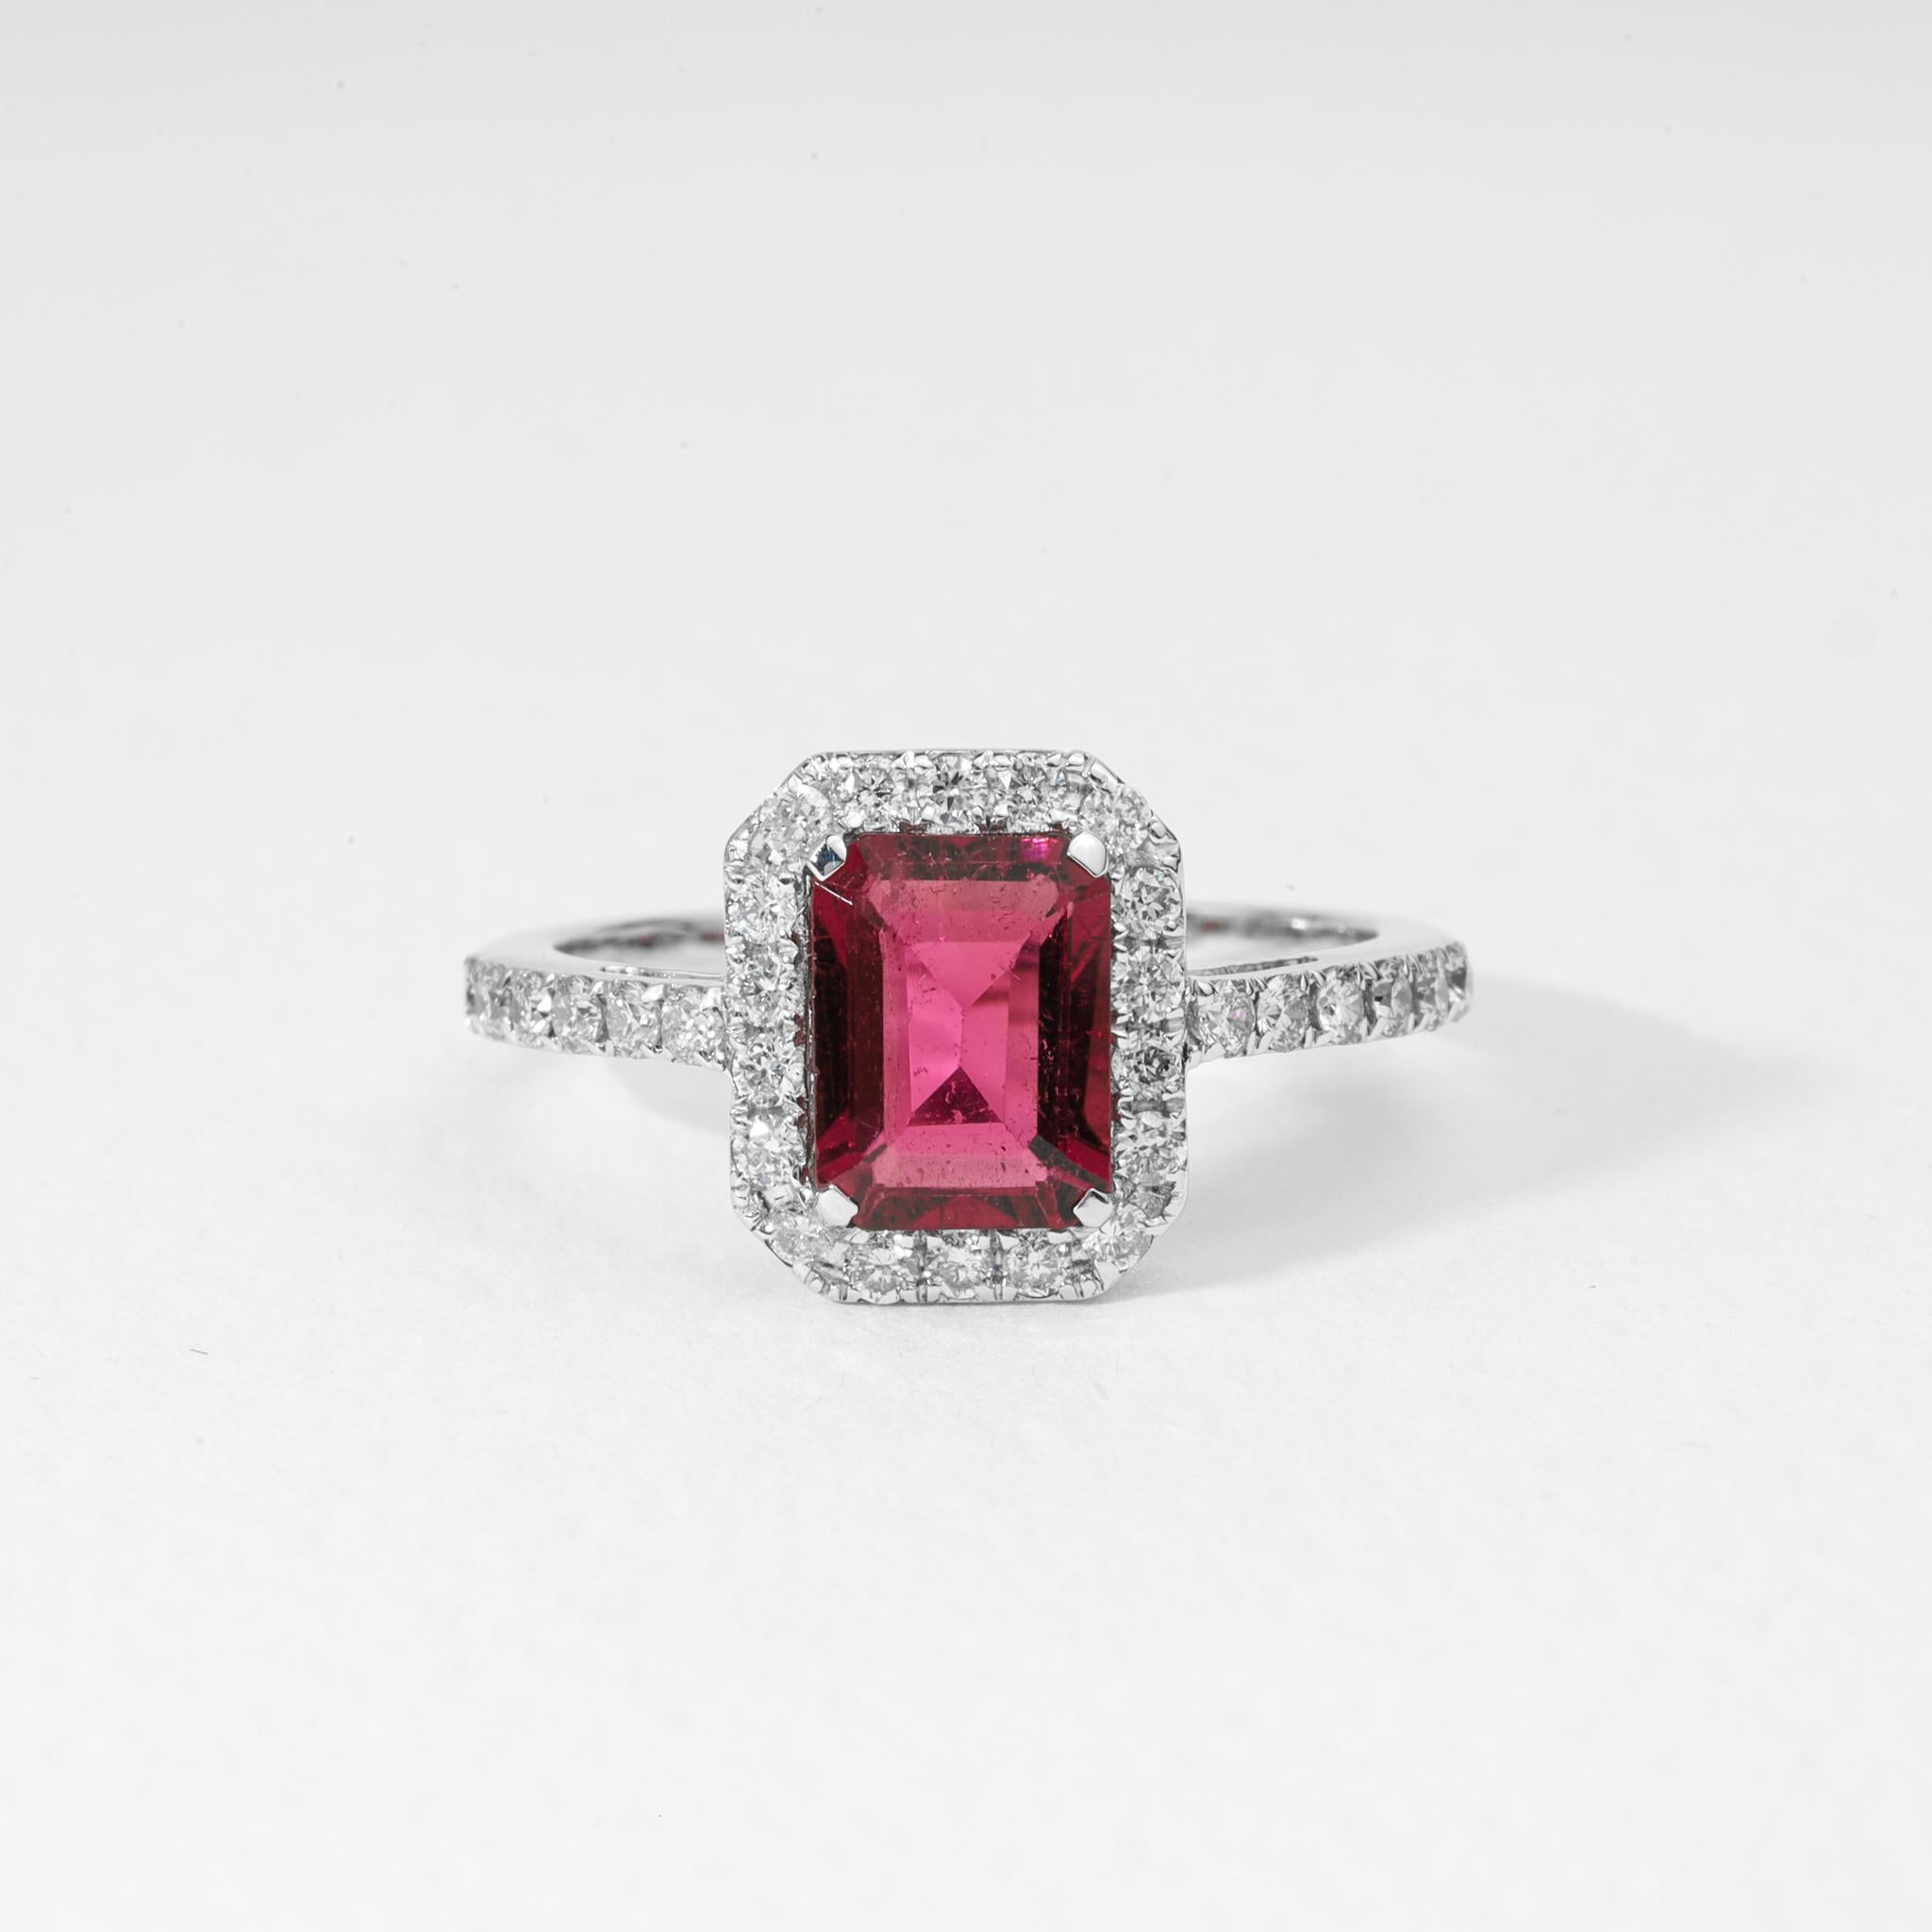 1.5 Carat Rubellite Tourmaline with 0.5Ct Diamonds Cocktail Ring 18k White In New Condition For Sale In Jaipur, RJ